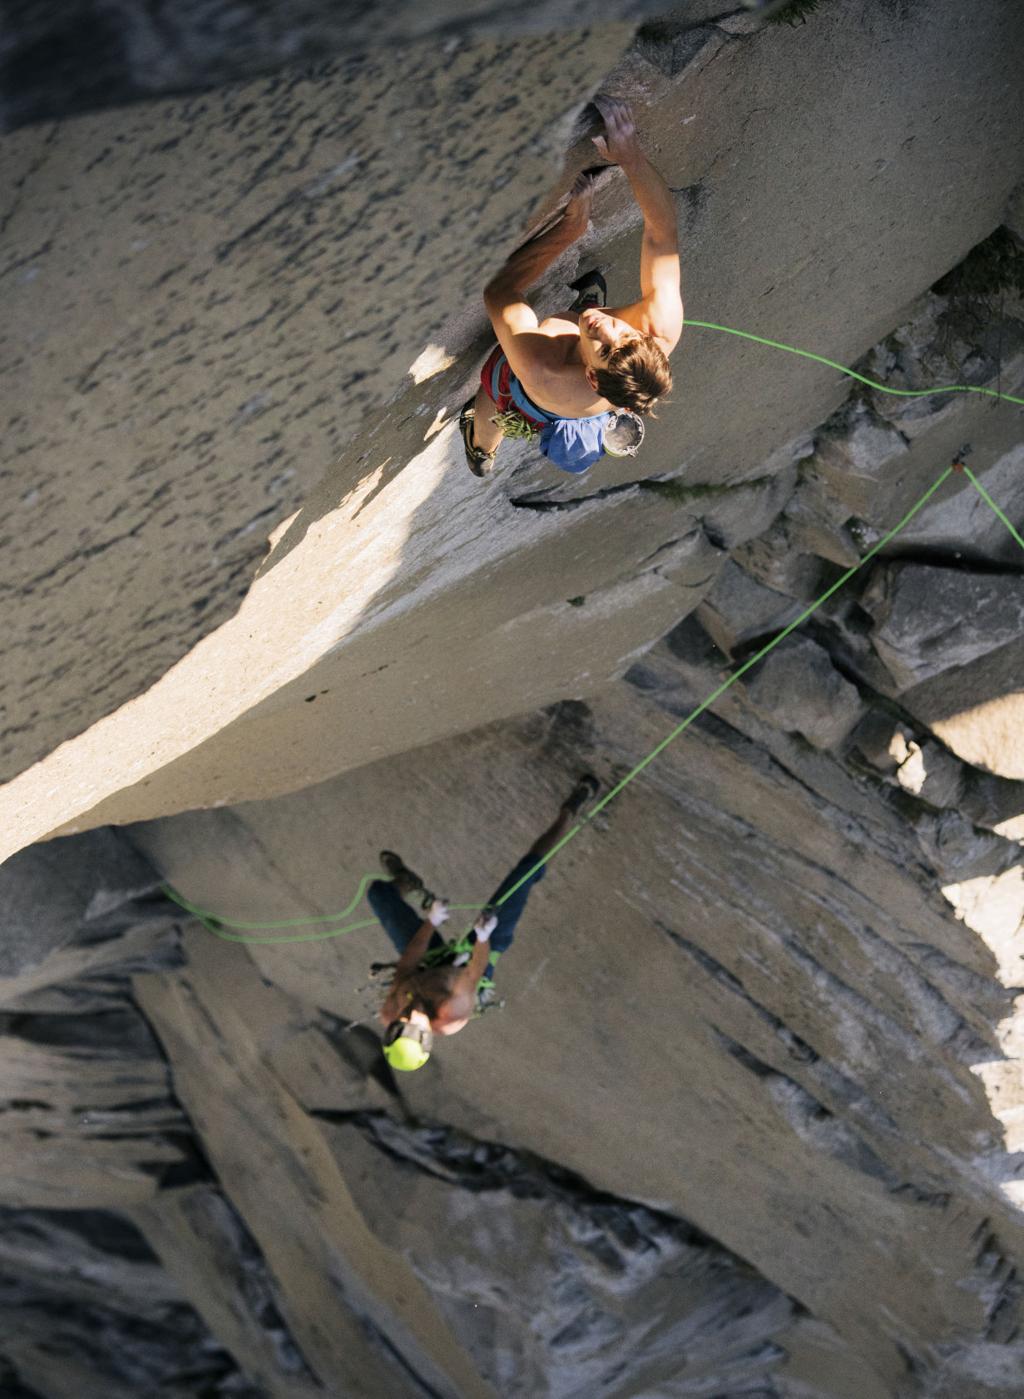 Climbers Alex Honnold and Tommy Caldwell add to legendary resumes